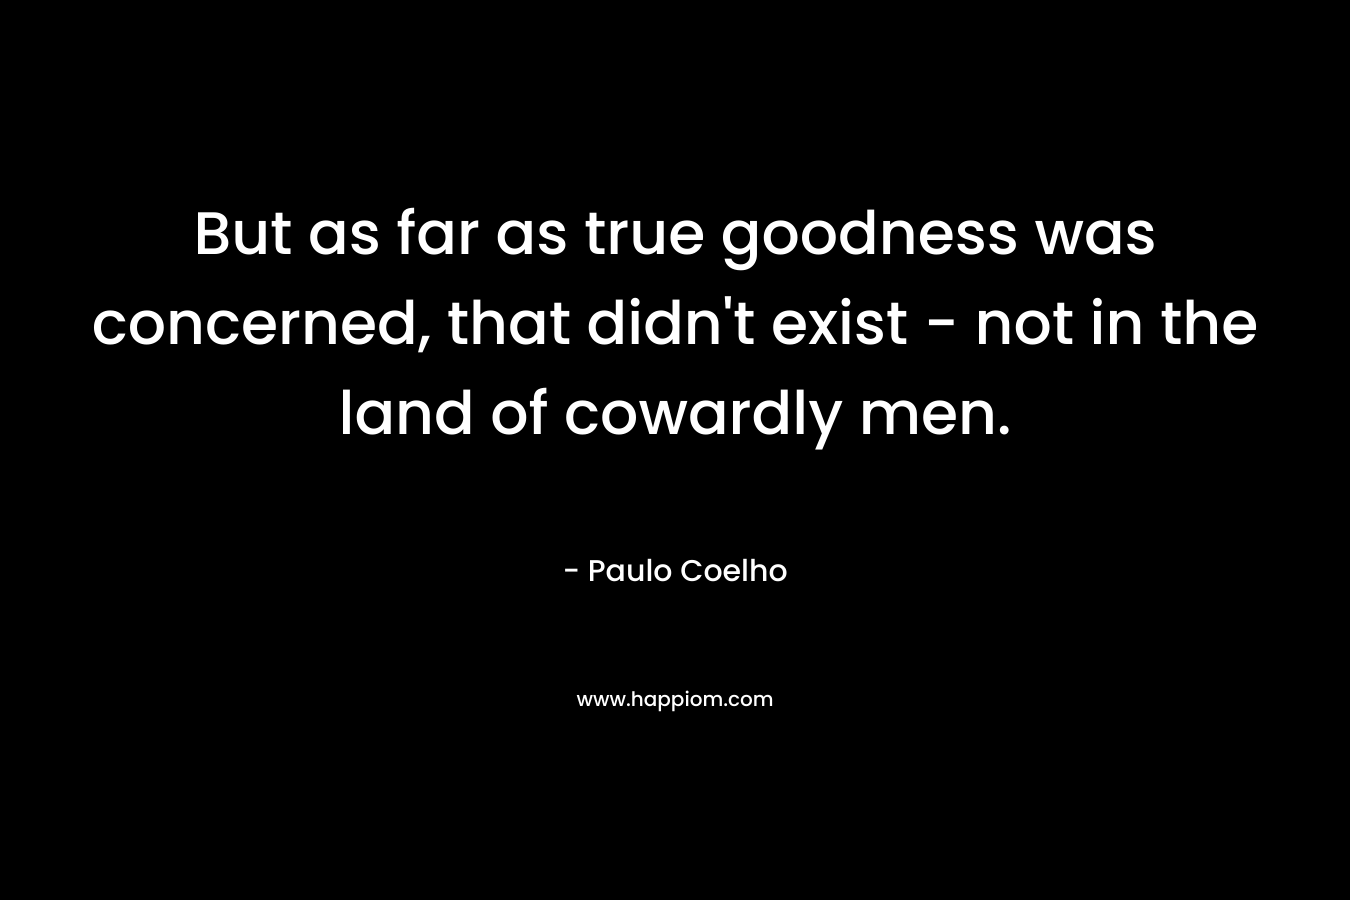 But as far as true goodness was concerned, that didn’t exist – not in the land of cowardly men. – Paulo Coelho